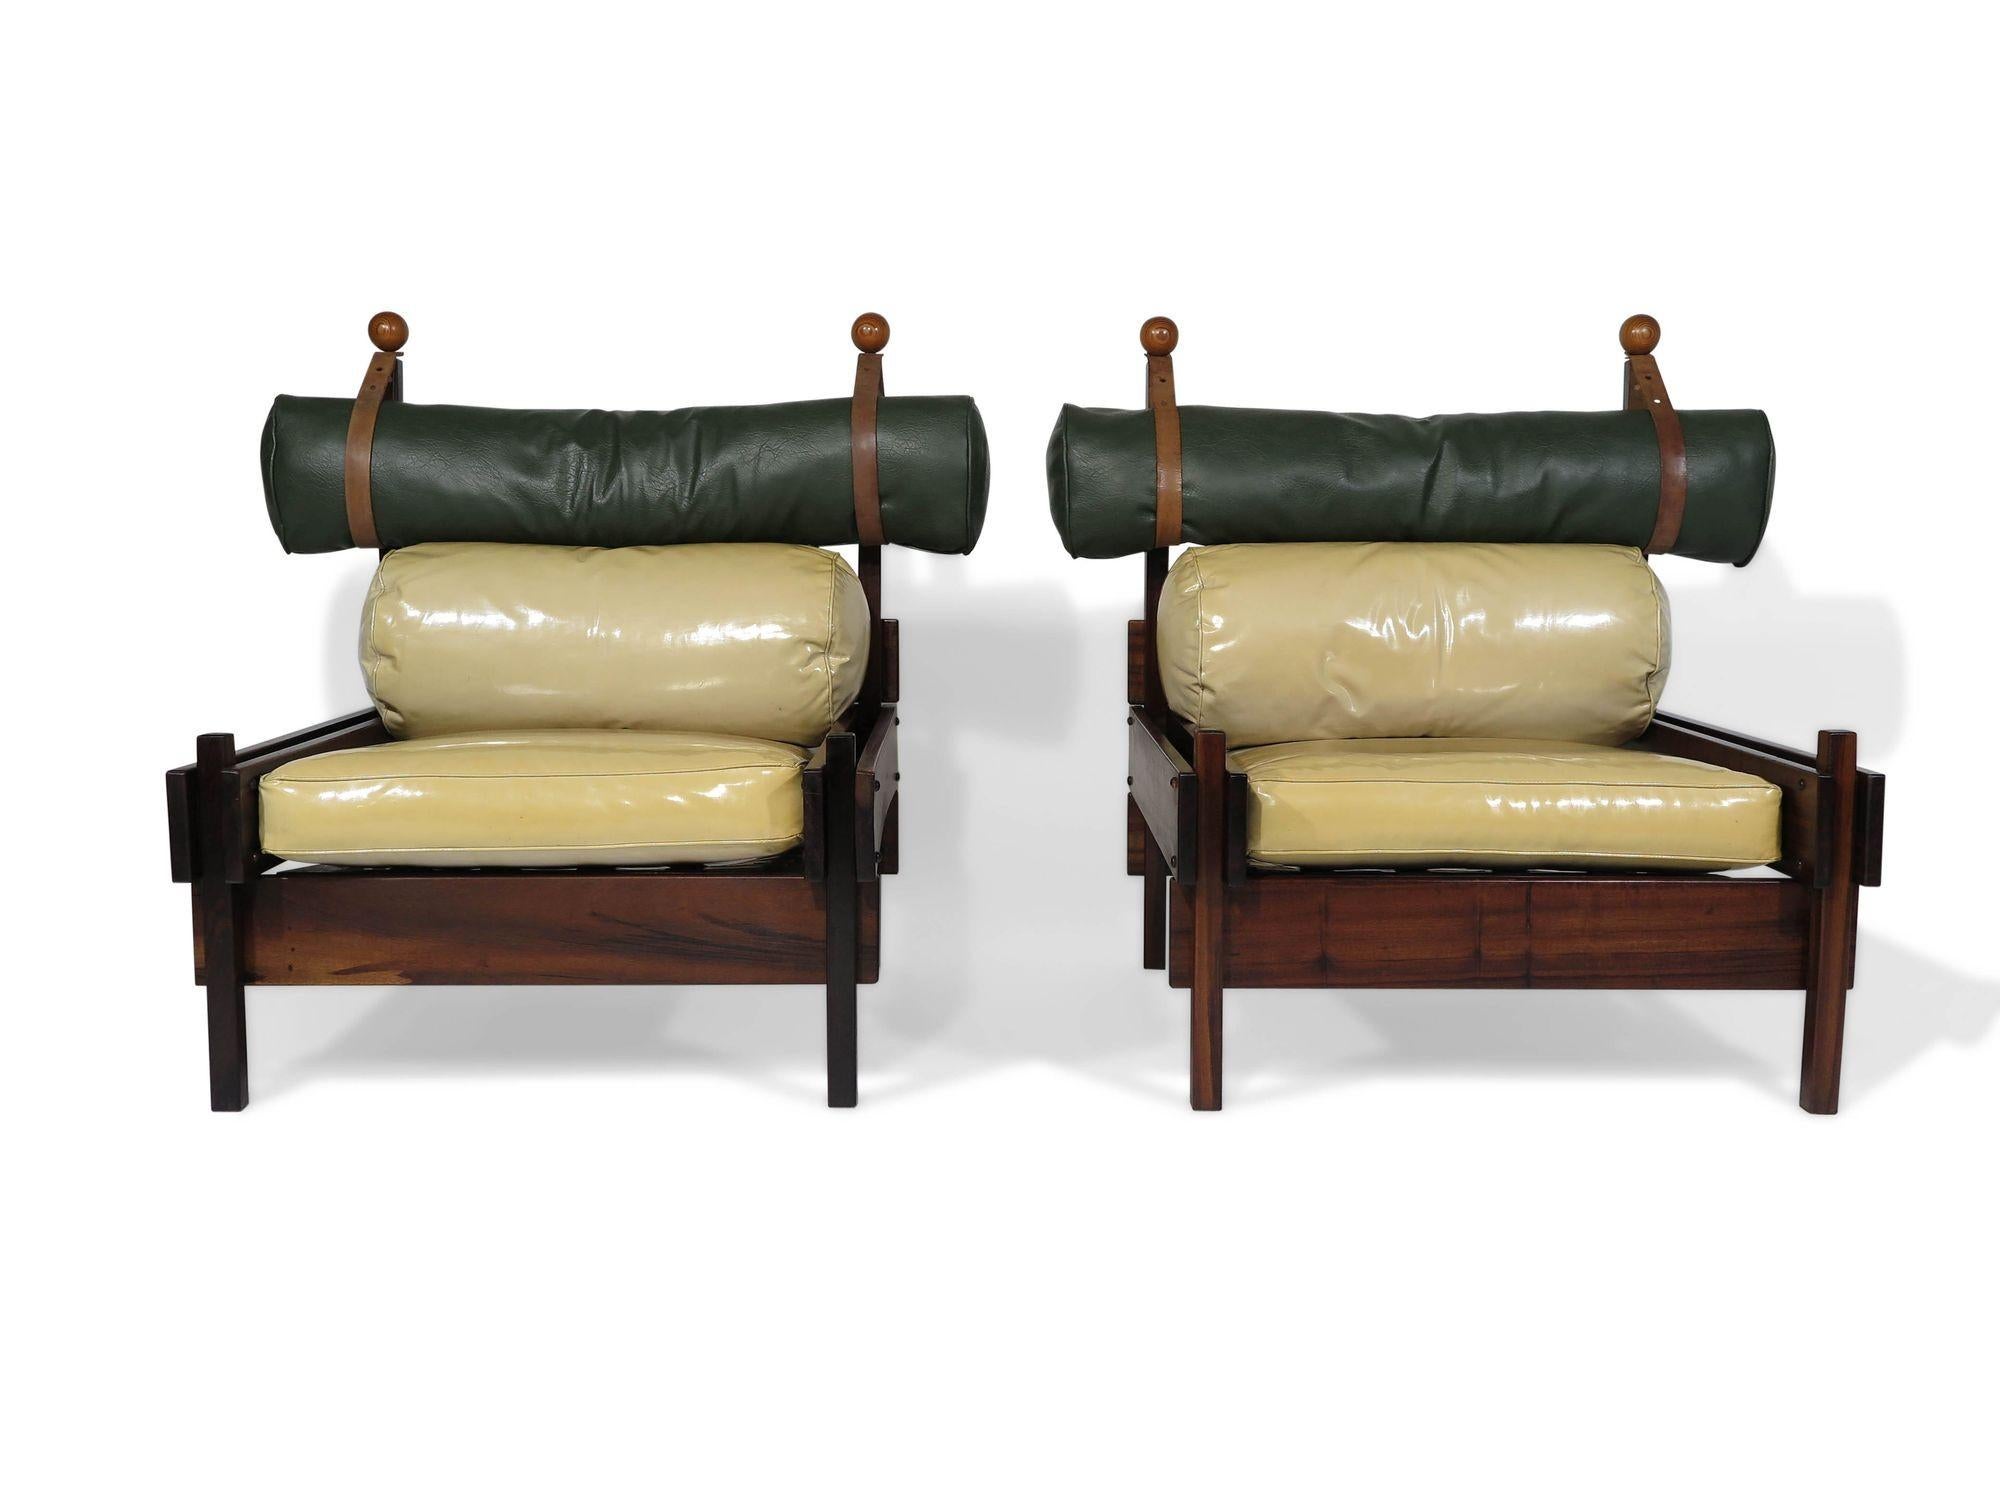 Pair of Sergio Rodrigues Tonico Lounge Chairs, 1962, Brazil For Sale 4